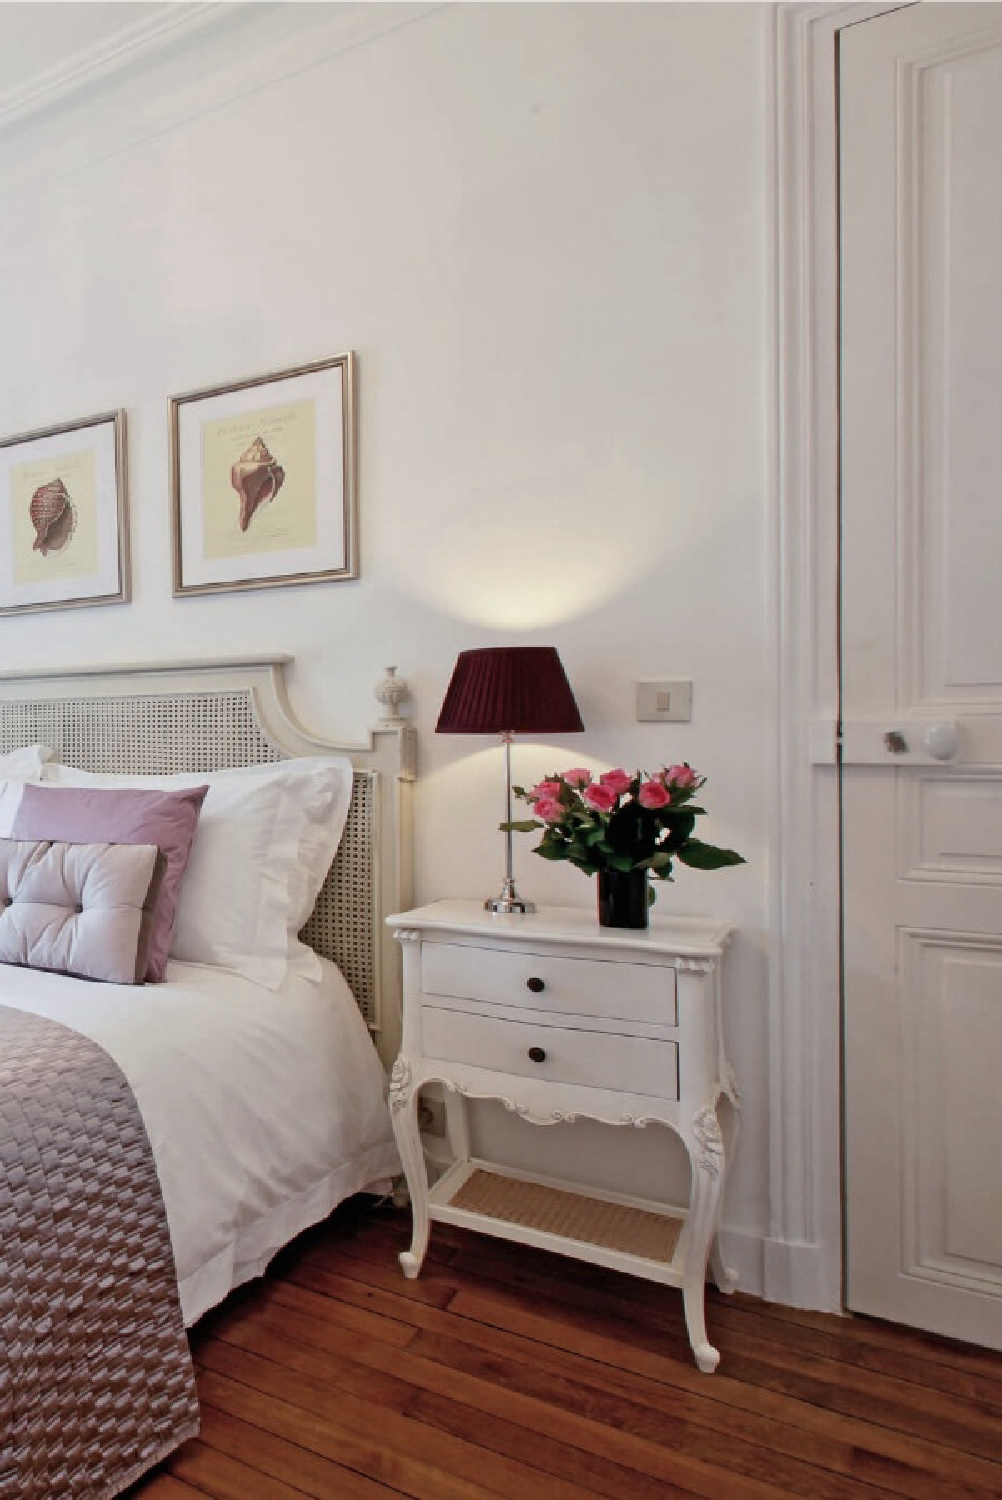 Paris apartment romantic bedroom decor with lavender accents and white walls - Hello Lovely Studio.